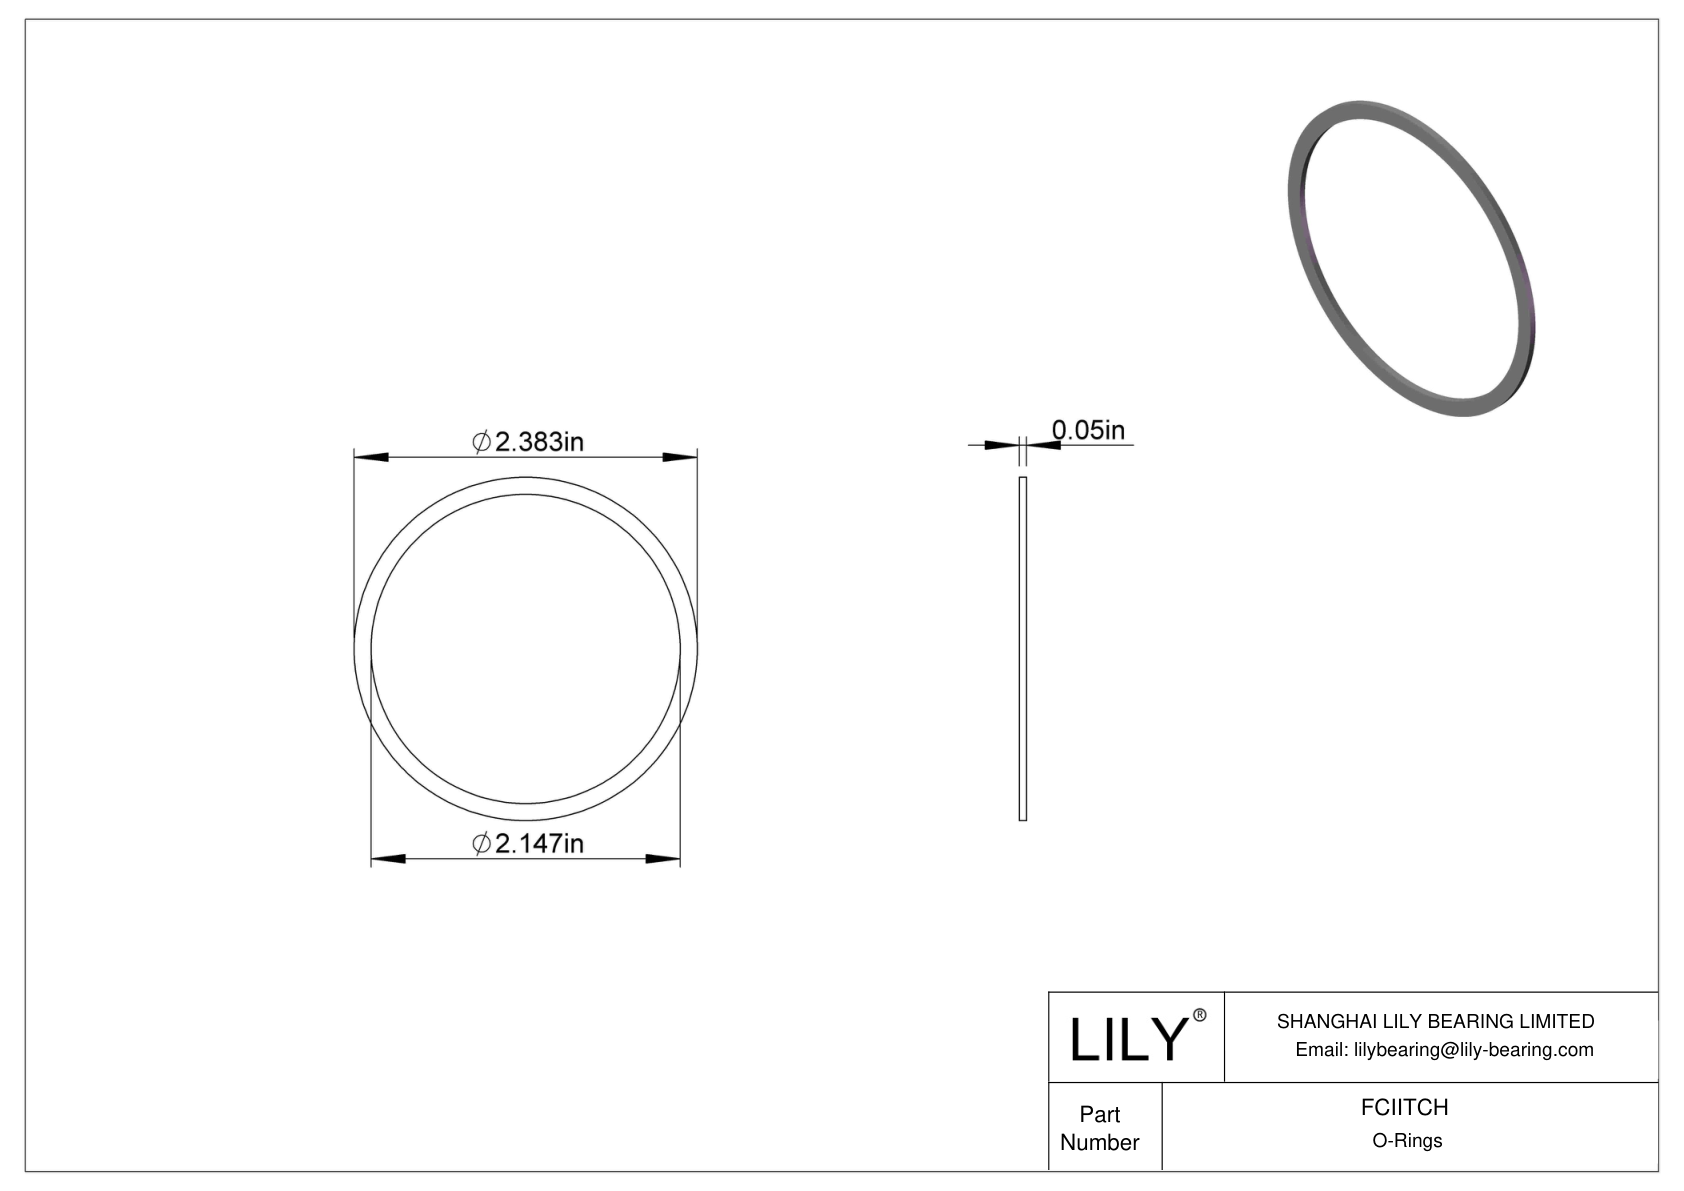 FCIITCH O-Ring Backup Rings cad drawing